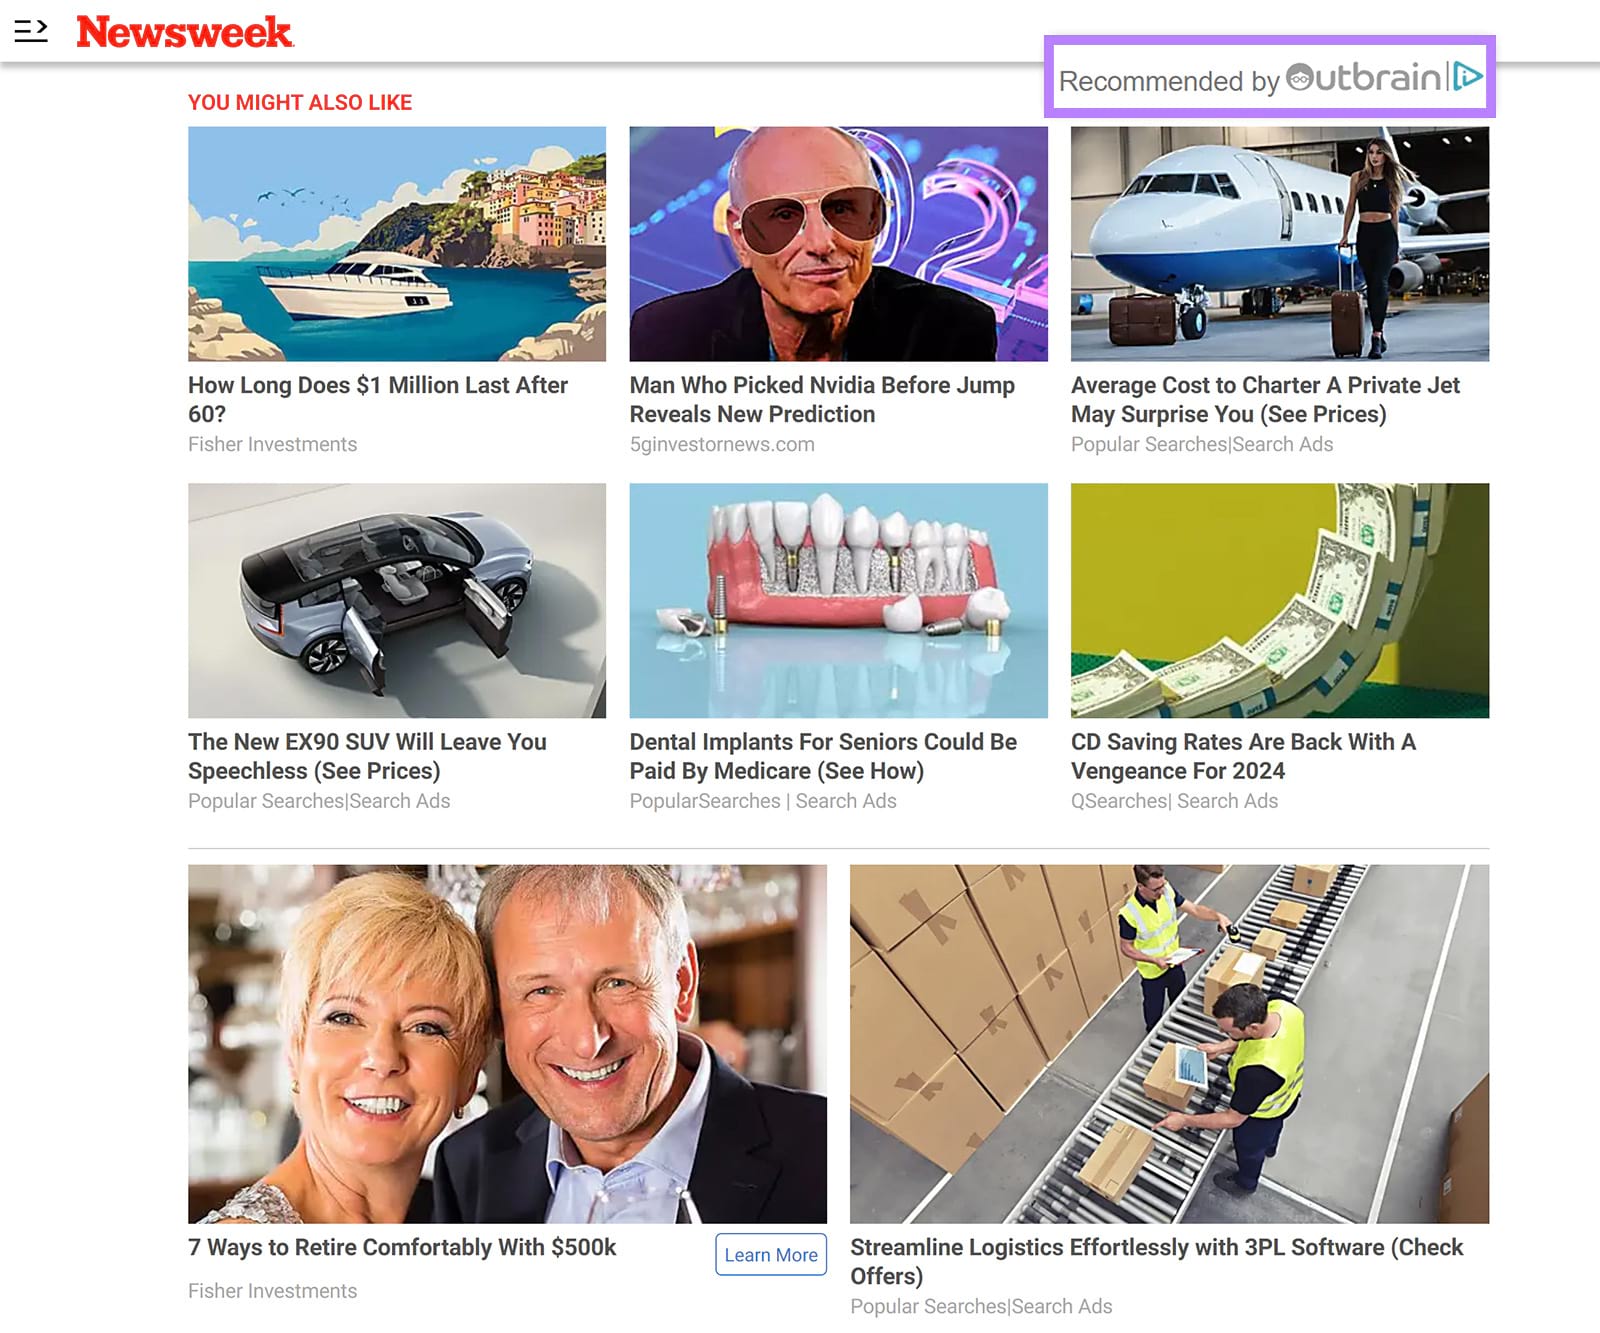 Newsweek content recommendations showing Recommended by Outbrain.